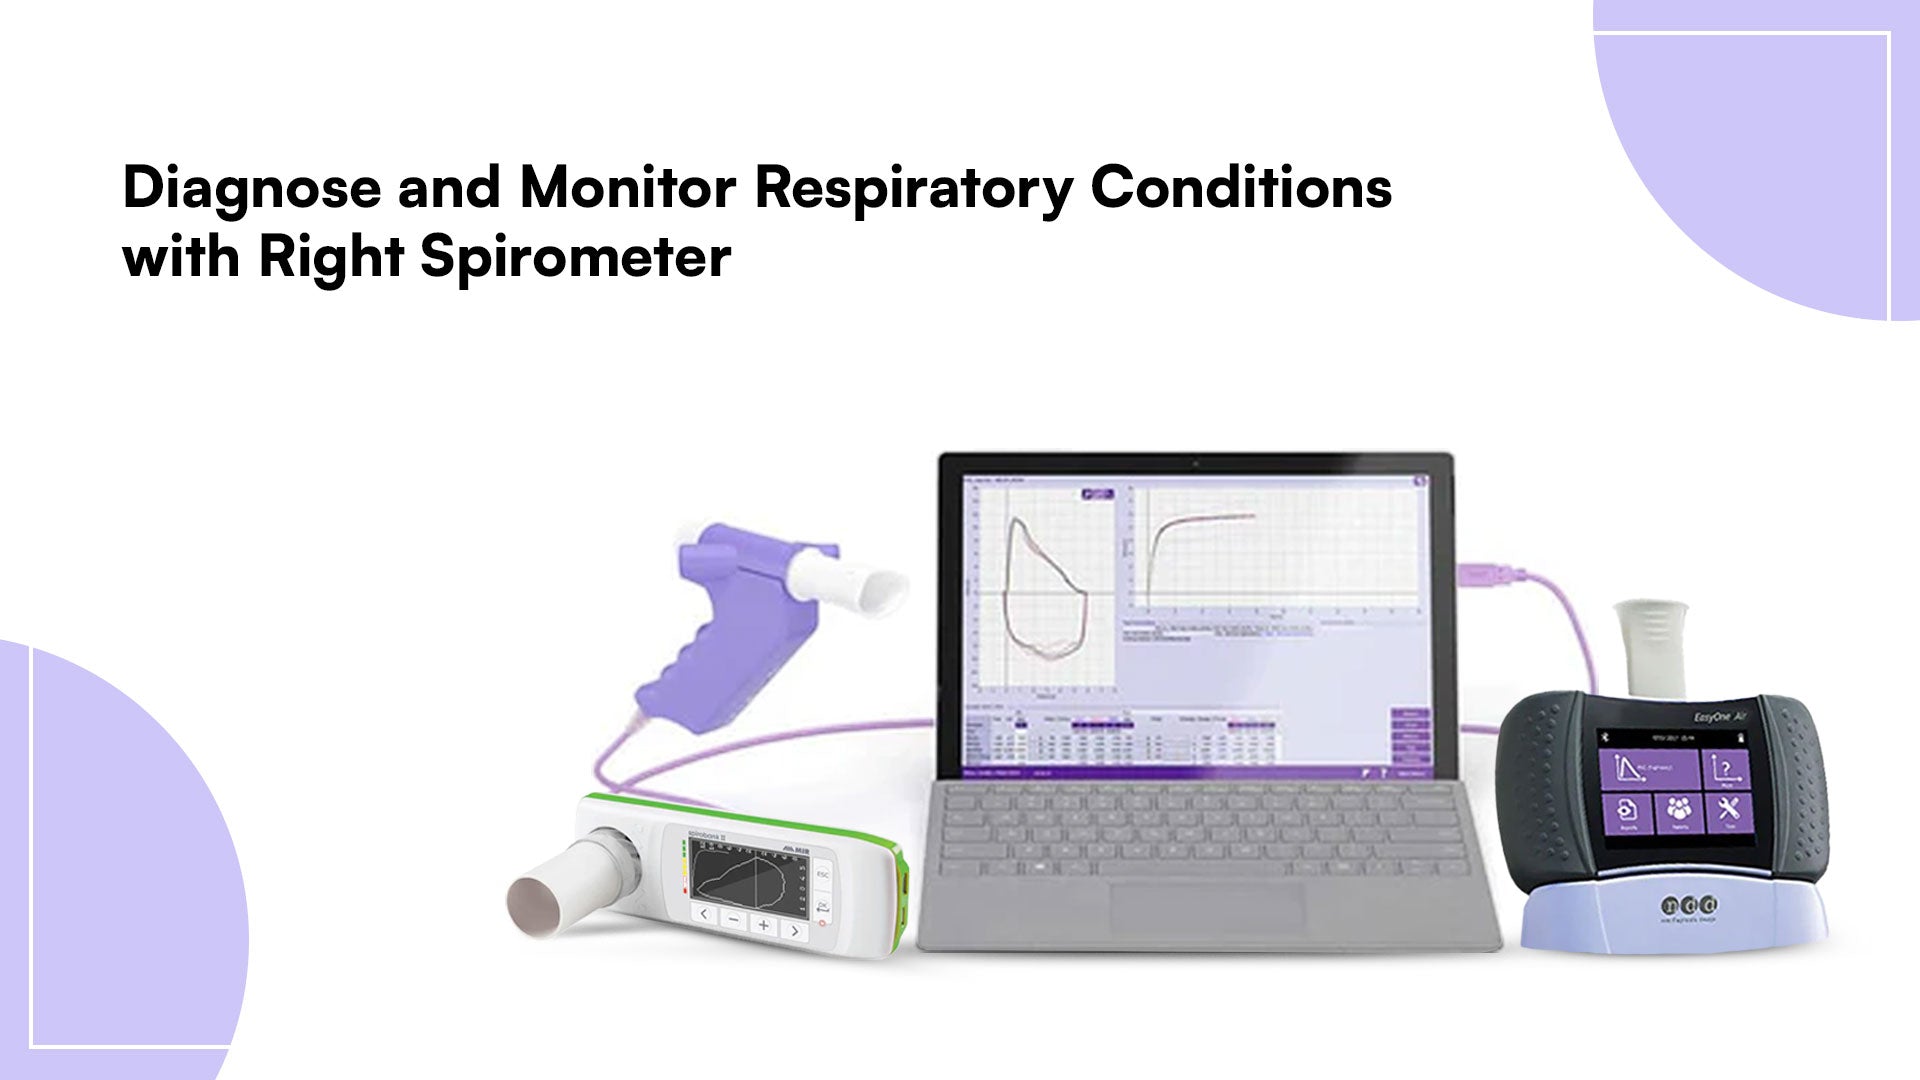 Digital Medical Devices, Oximetry and Spirometry Supplies - MIR